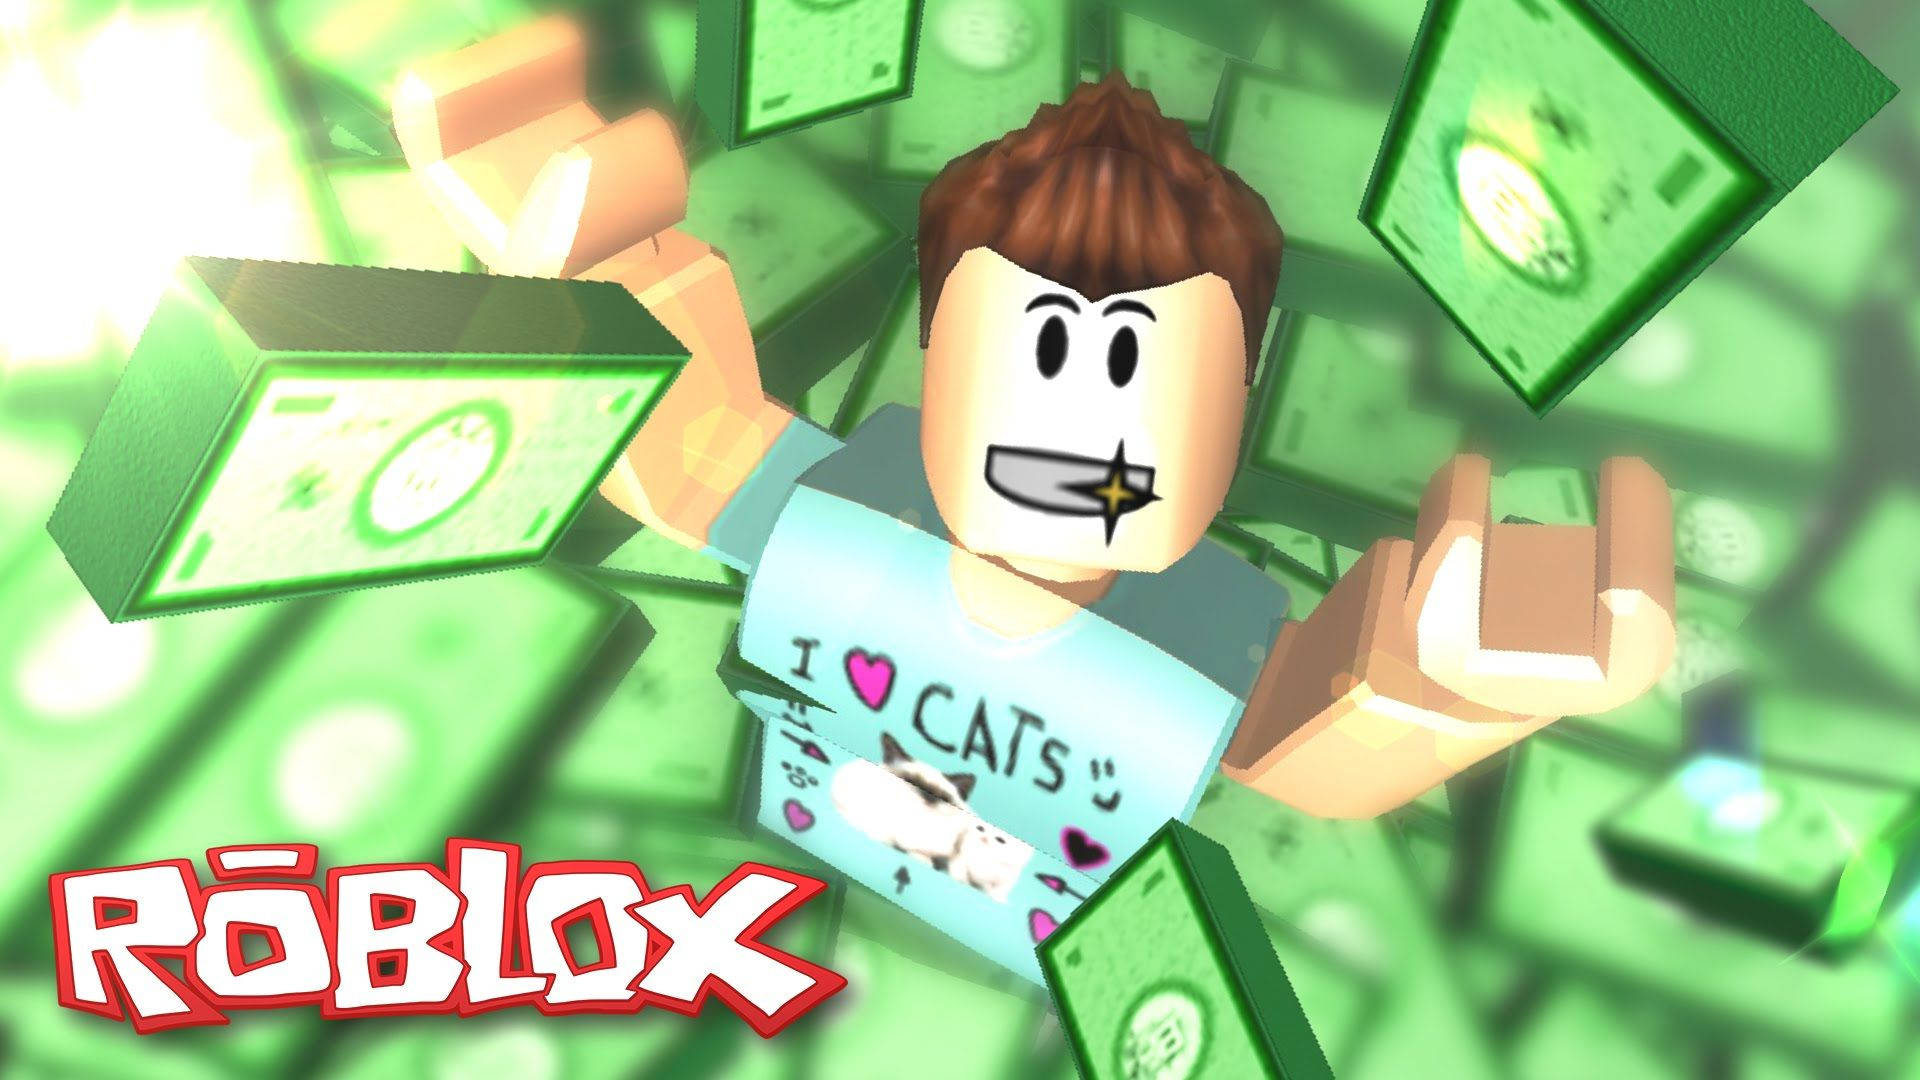 Show off your cool, rich avatar in Roblox! Wallpaper